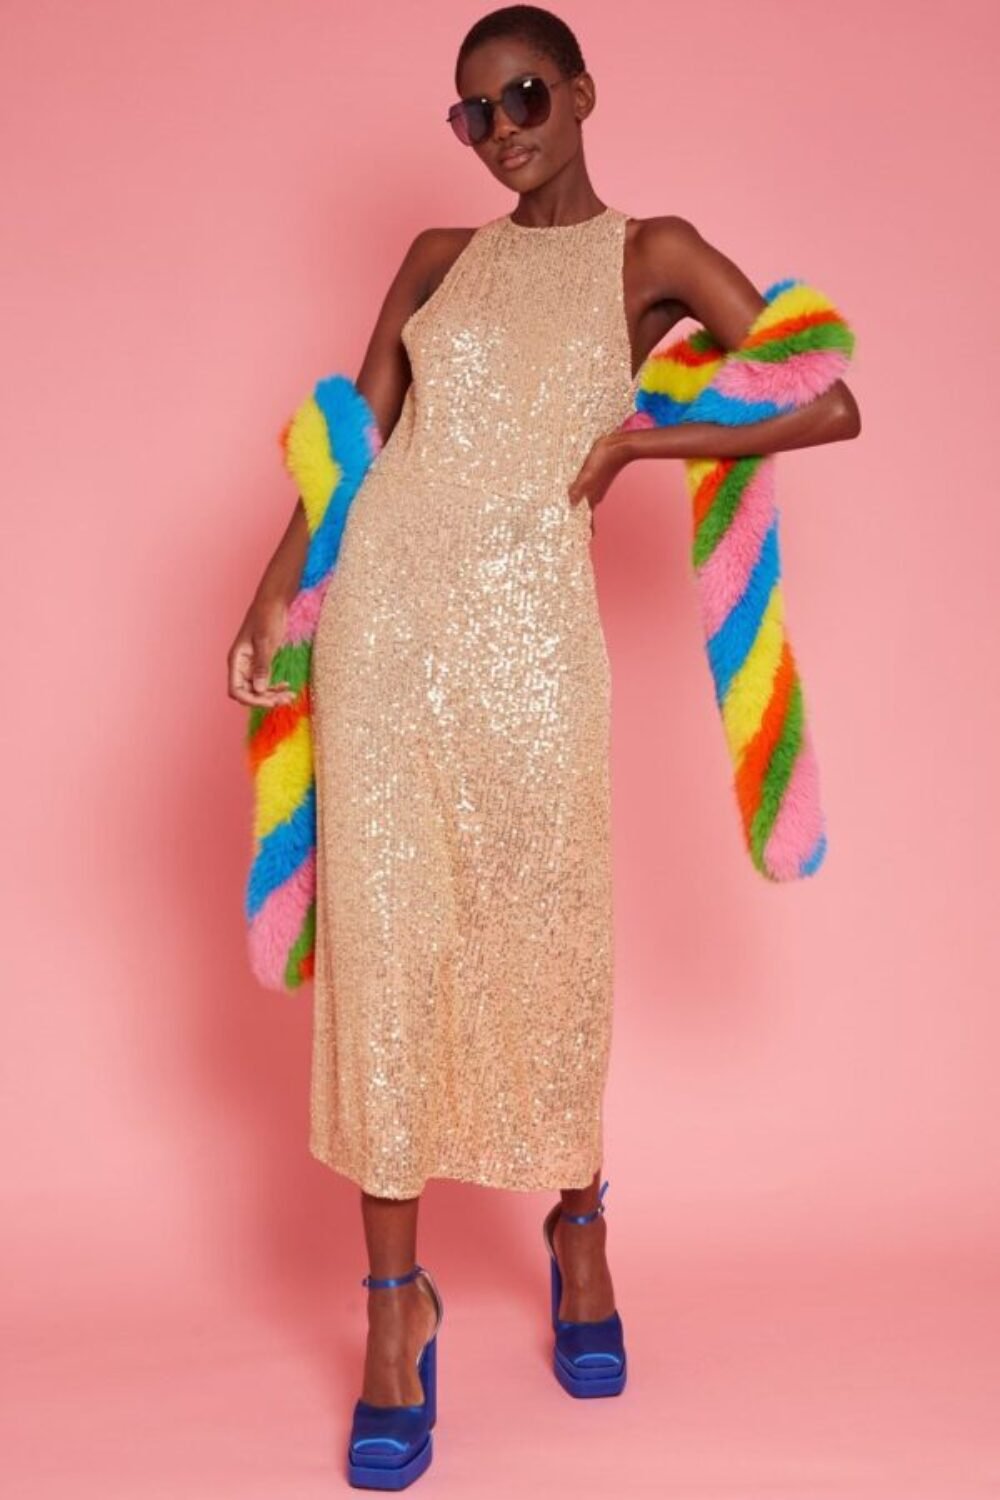 Shop Lux Gold Sequin Lightweight Maxi Dress and women's luxury and designer clothes at www.lux-apparel.co.uk